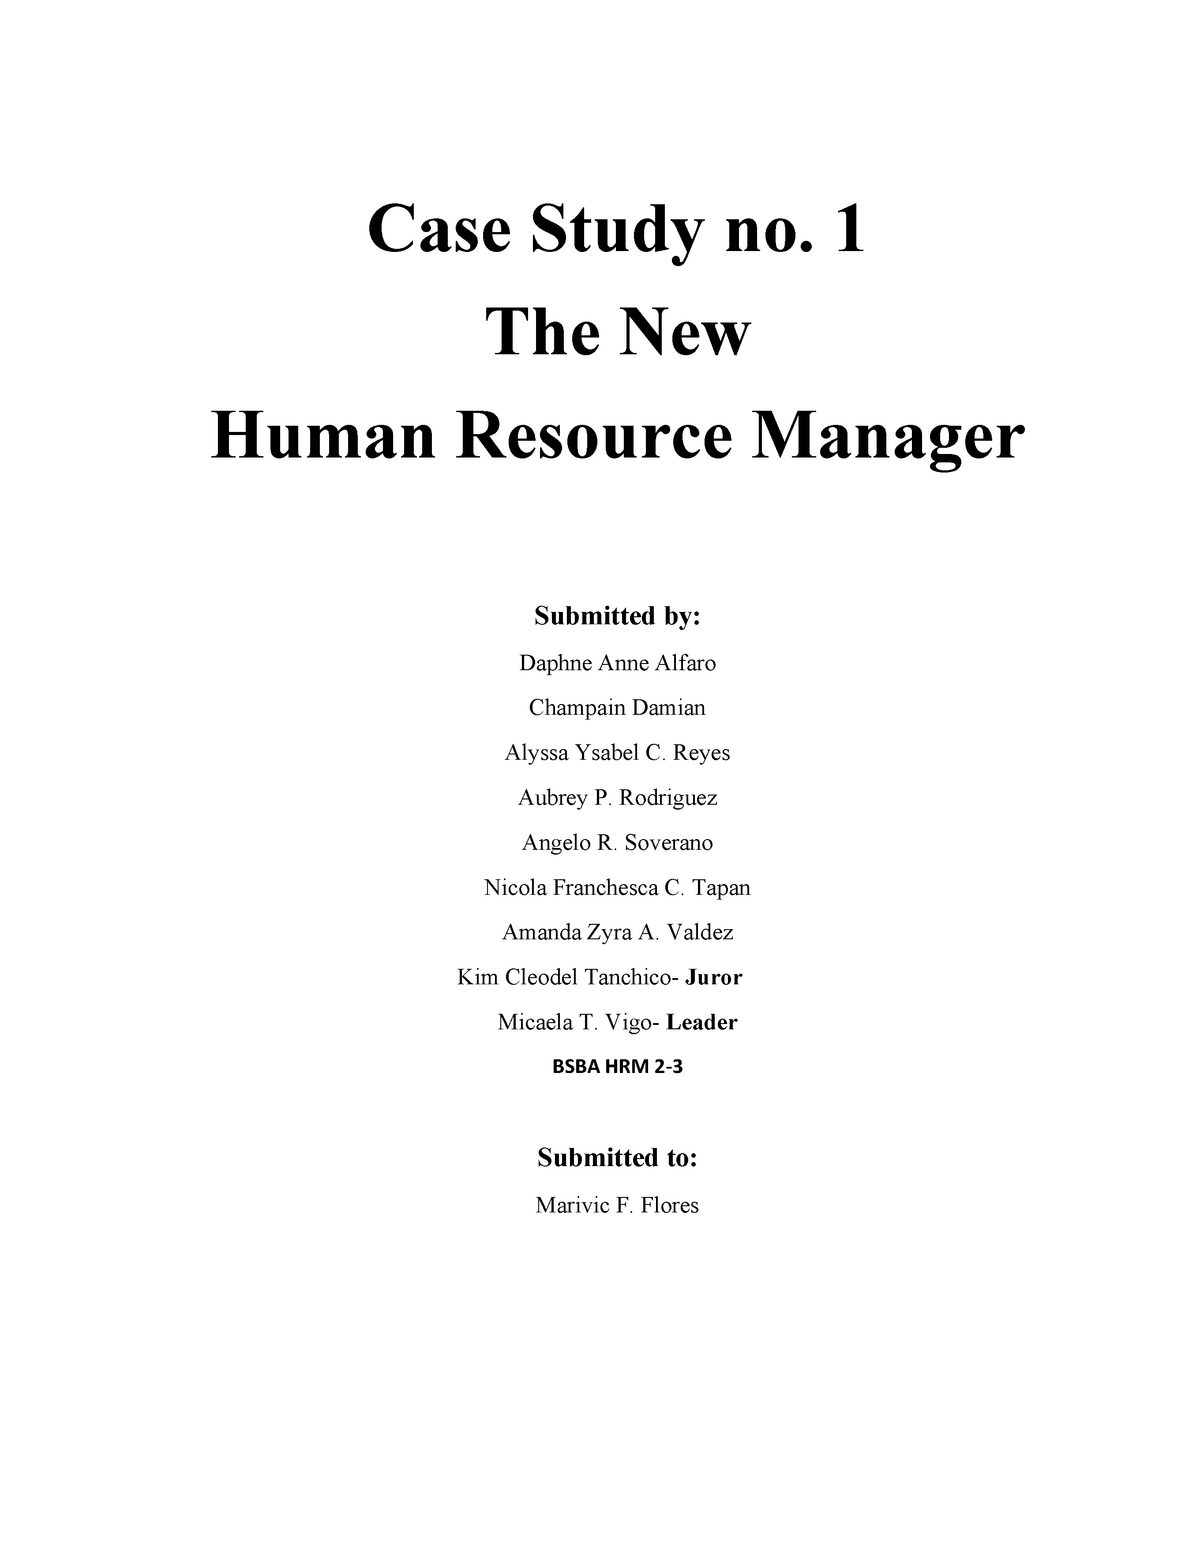 human resources case study with answers